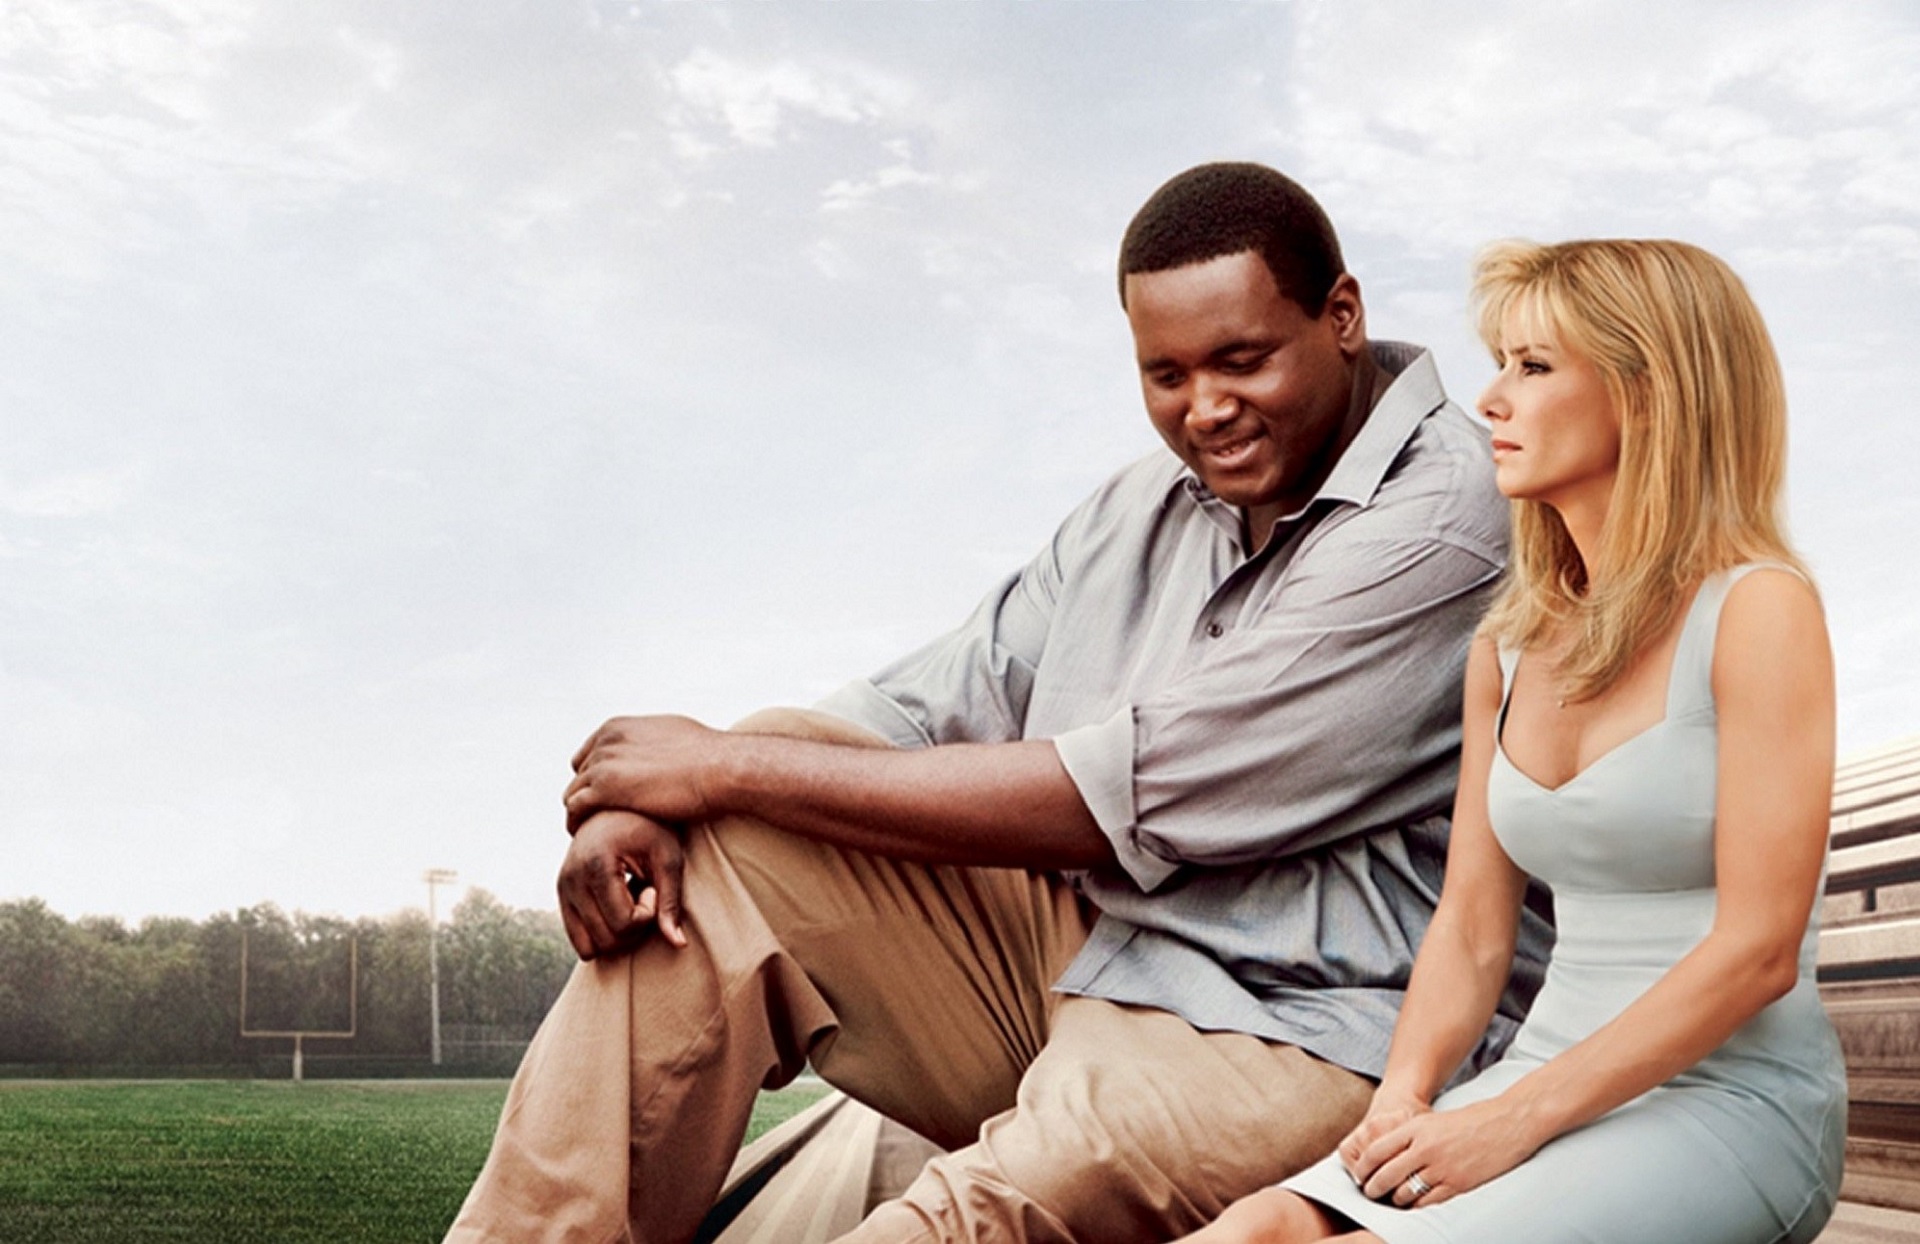 The Blind Side at an AMC Theatre near you.